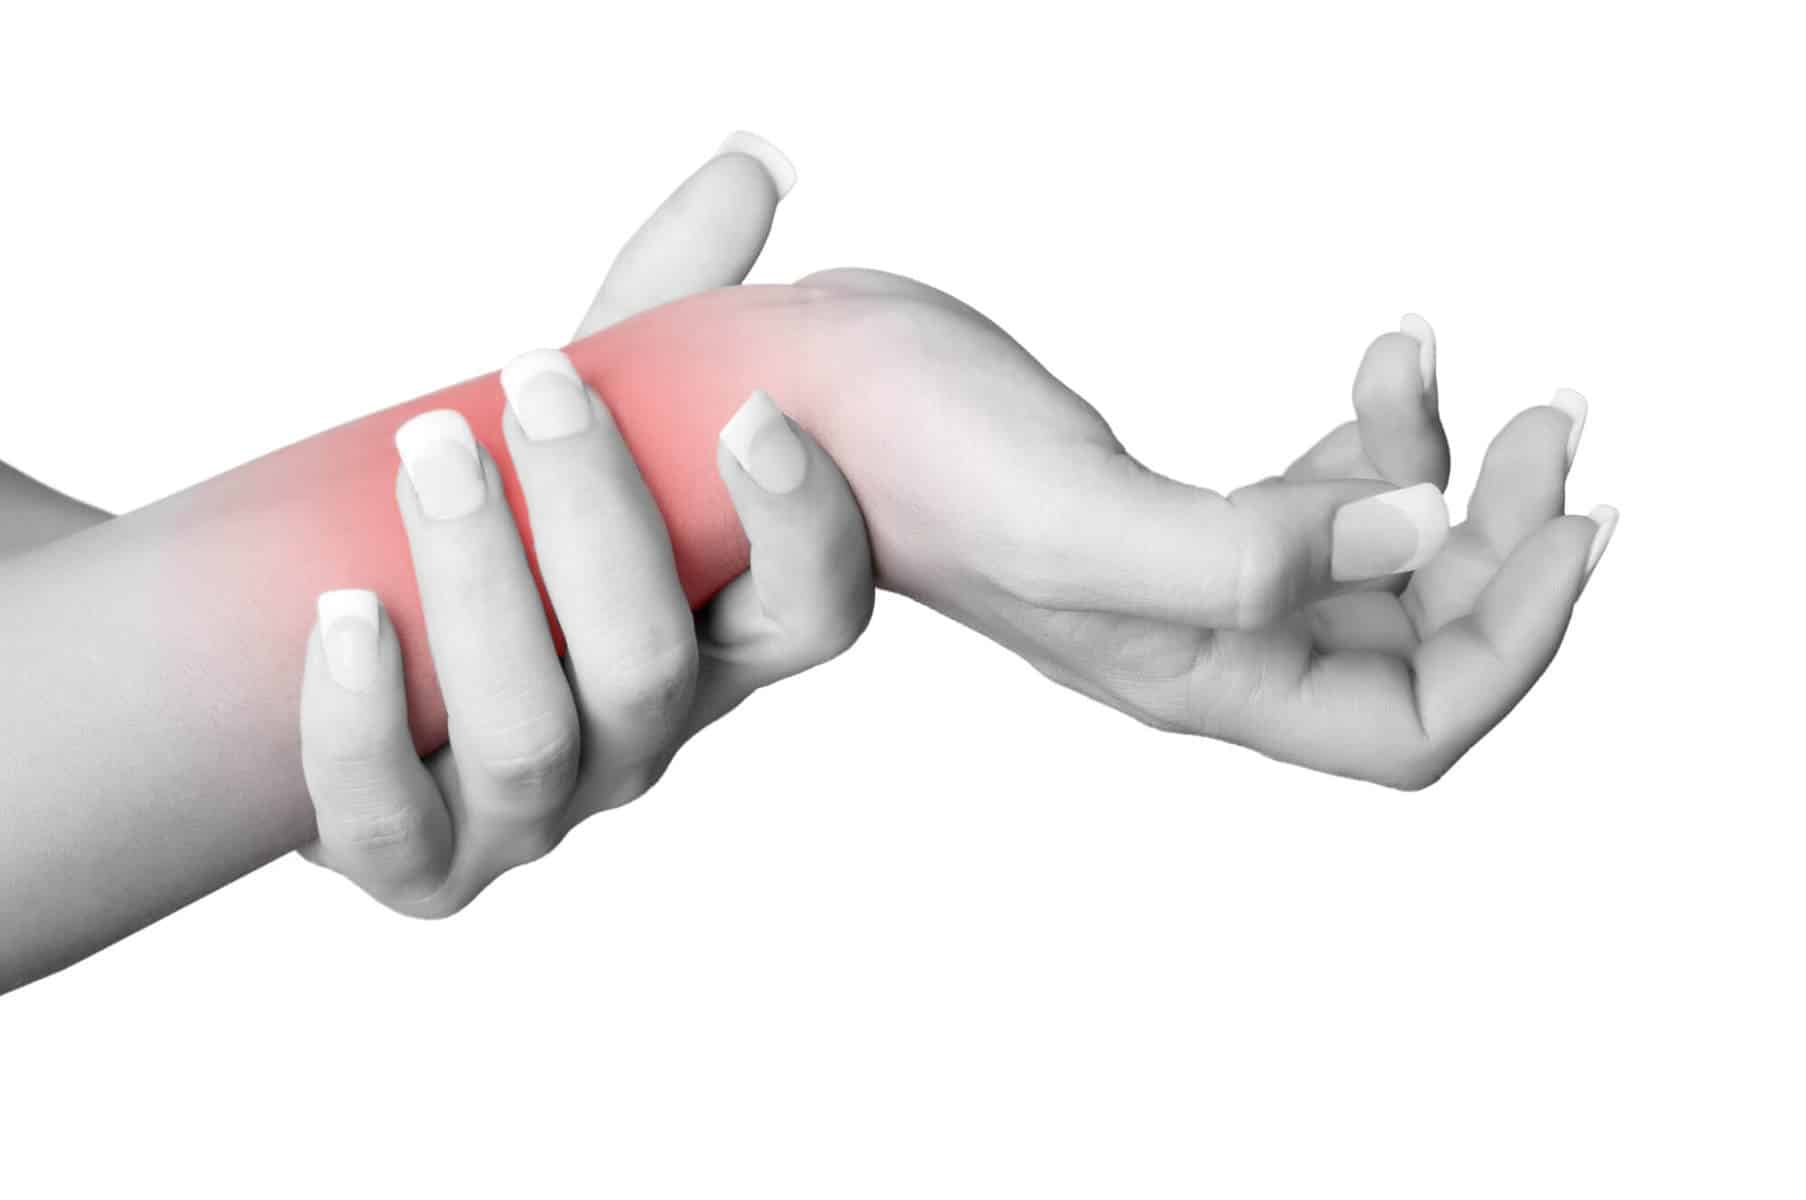 Inflammation - Joint or wrist pain